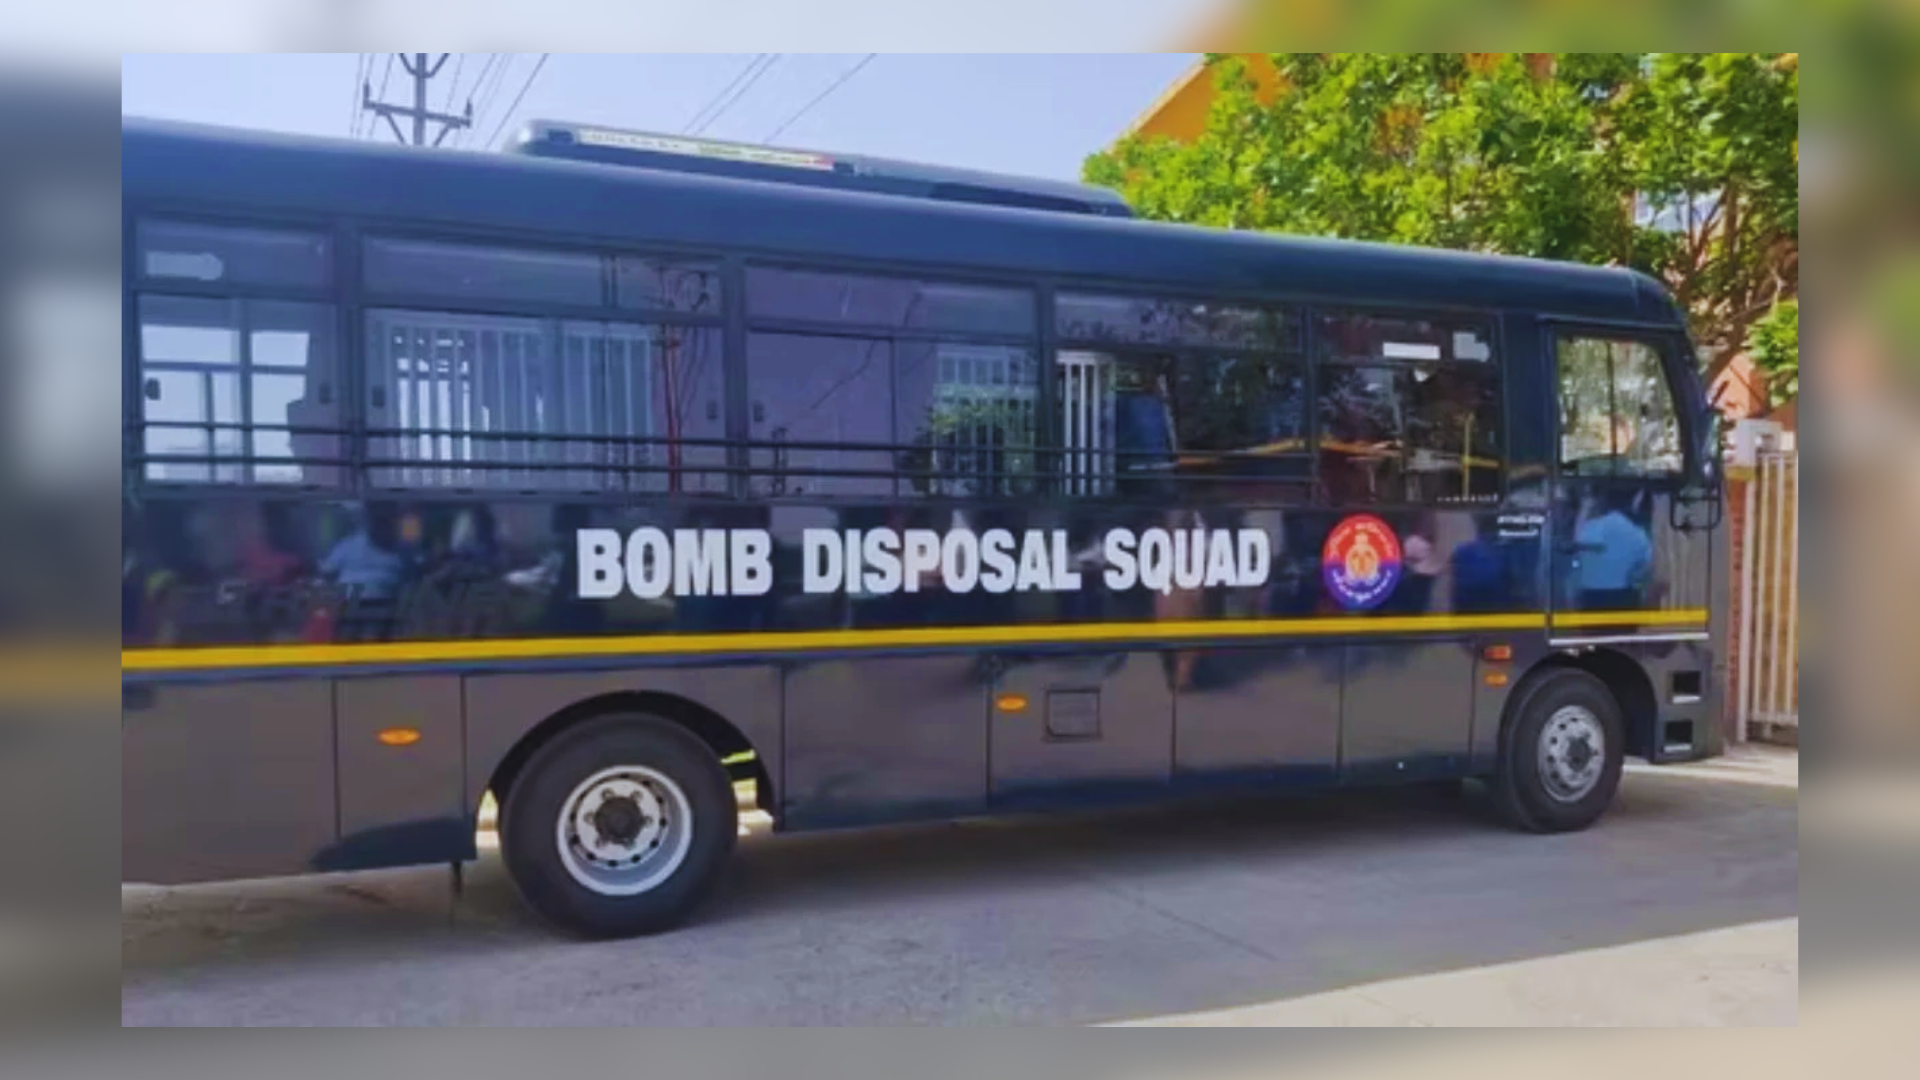 Delhi Police To High Court: Deploy Smaller Teams For Bomb Disposal And Detection